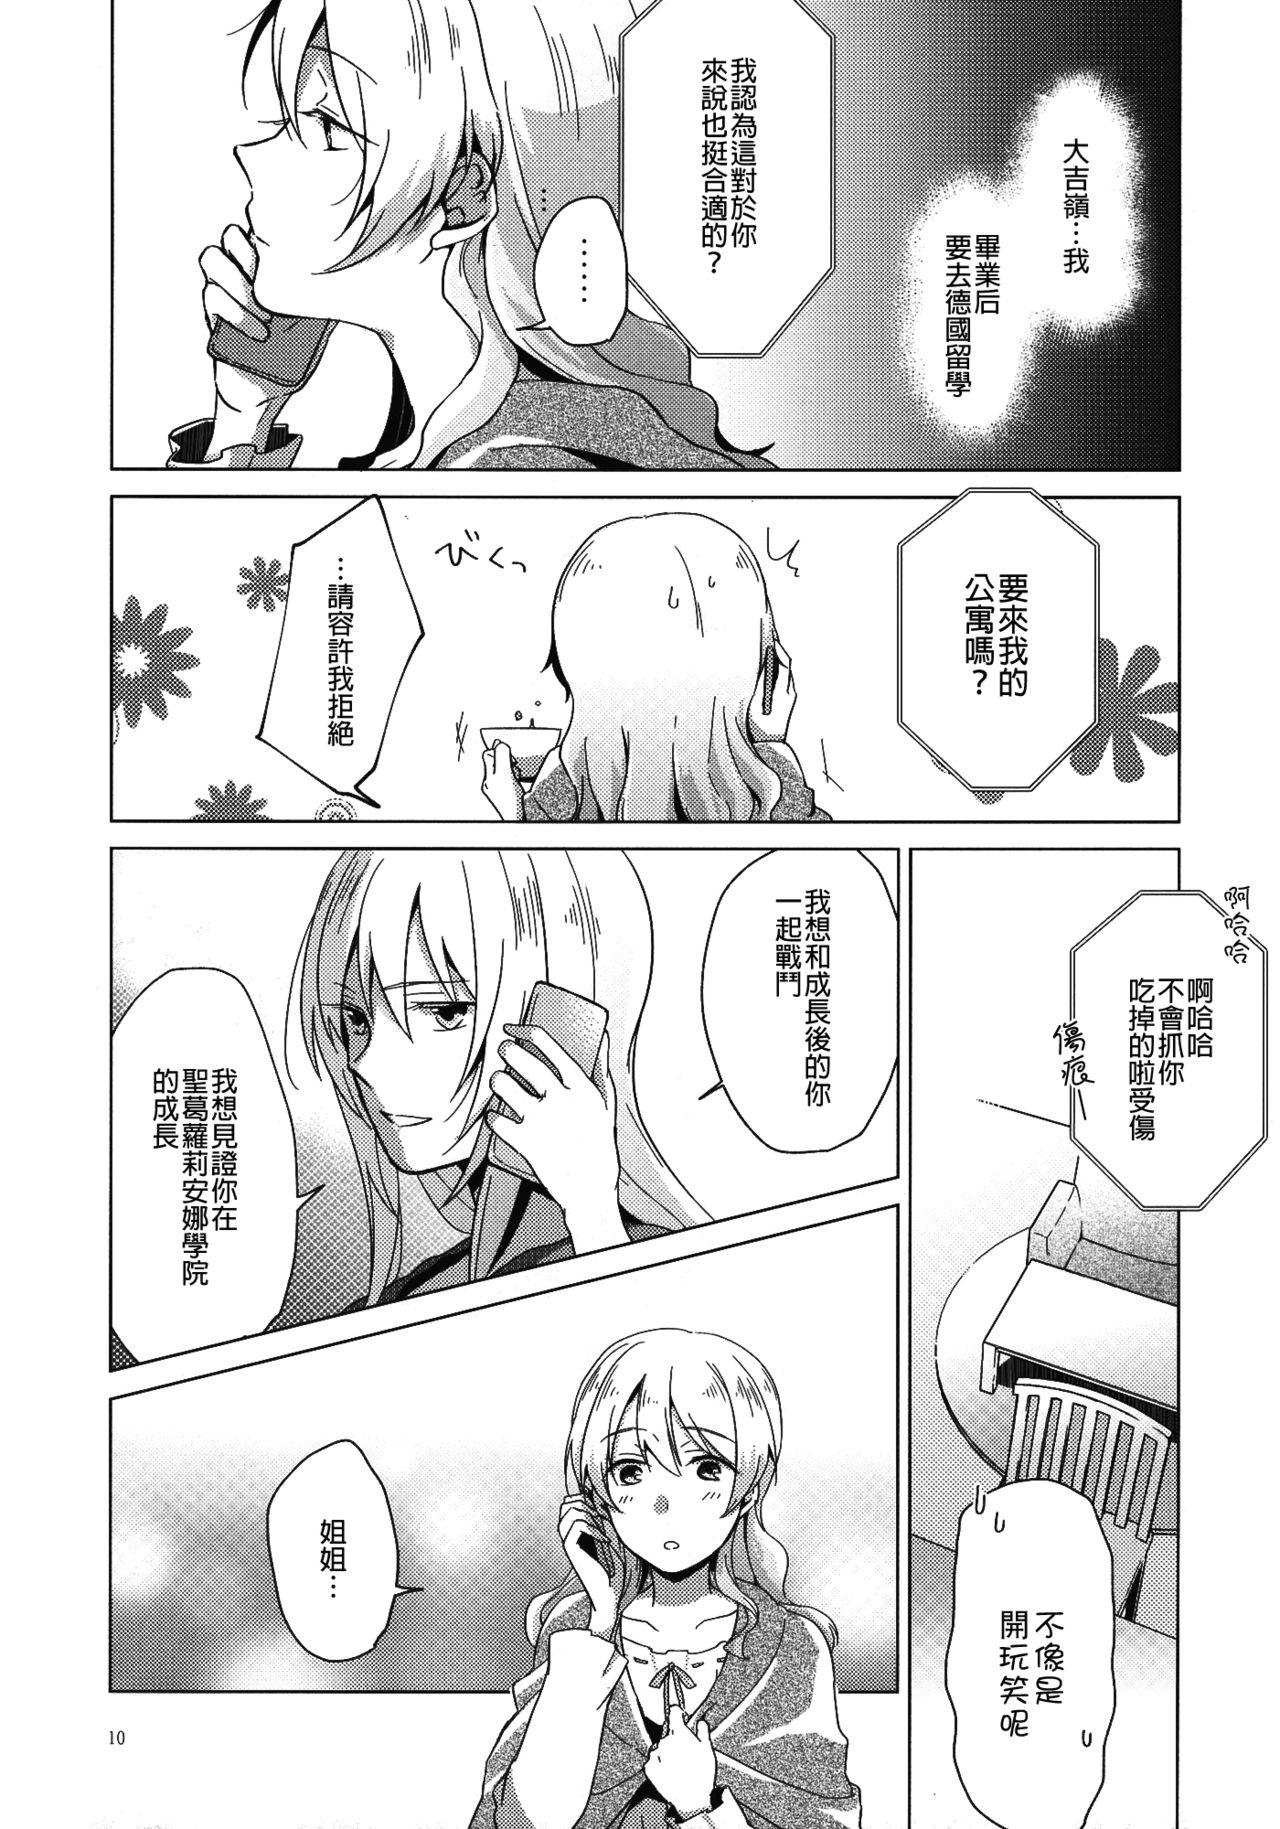 Les Over Time | 超時 - Girls und panzer Arab - Page 10